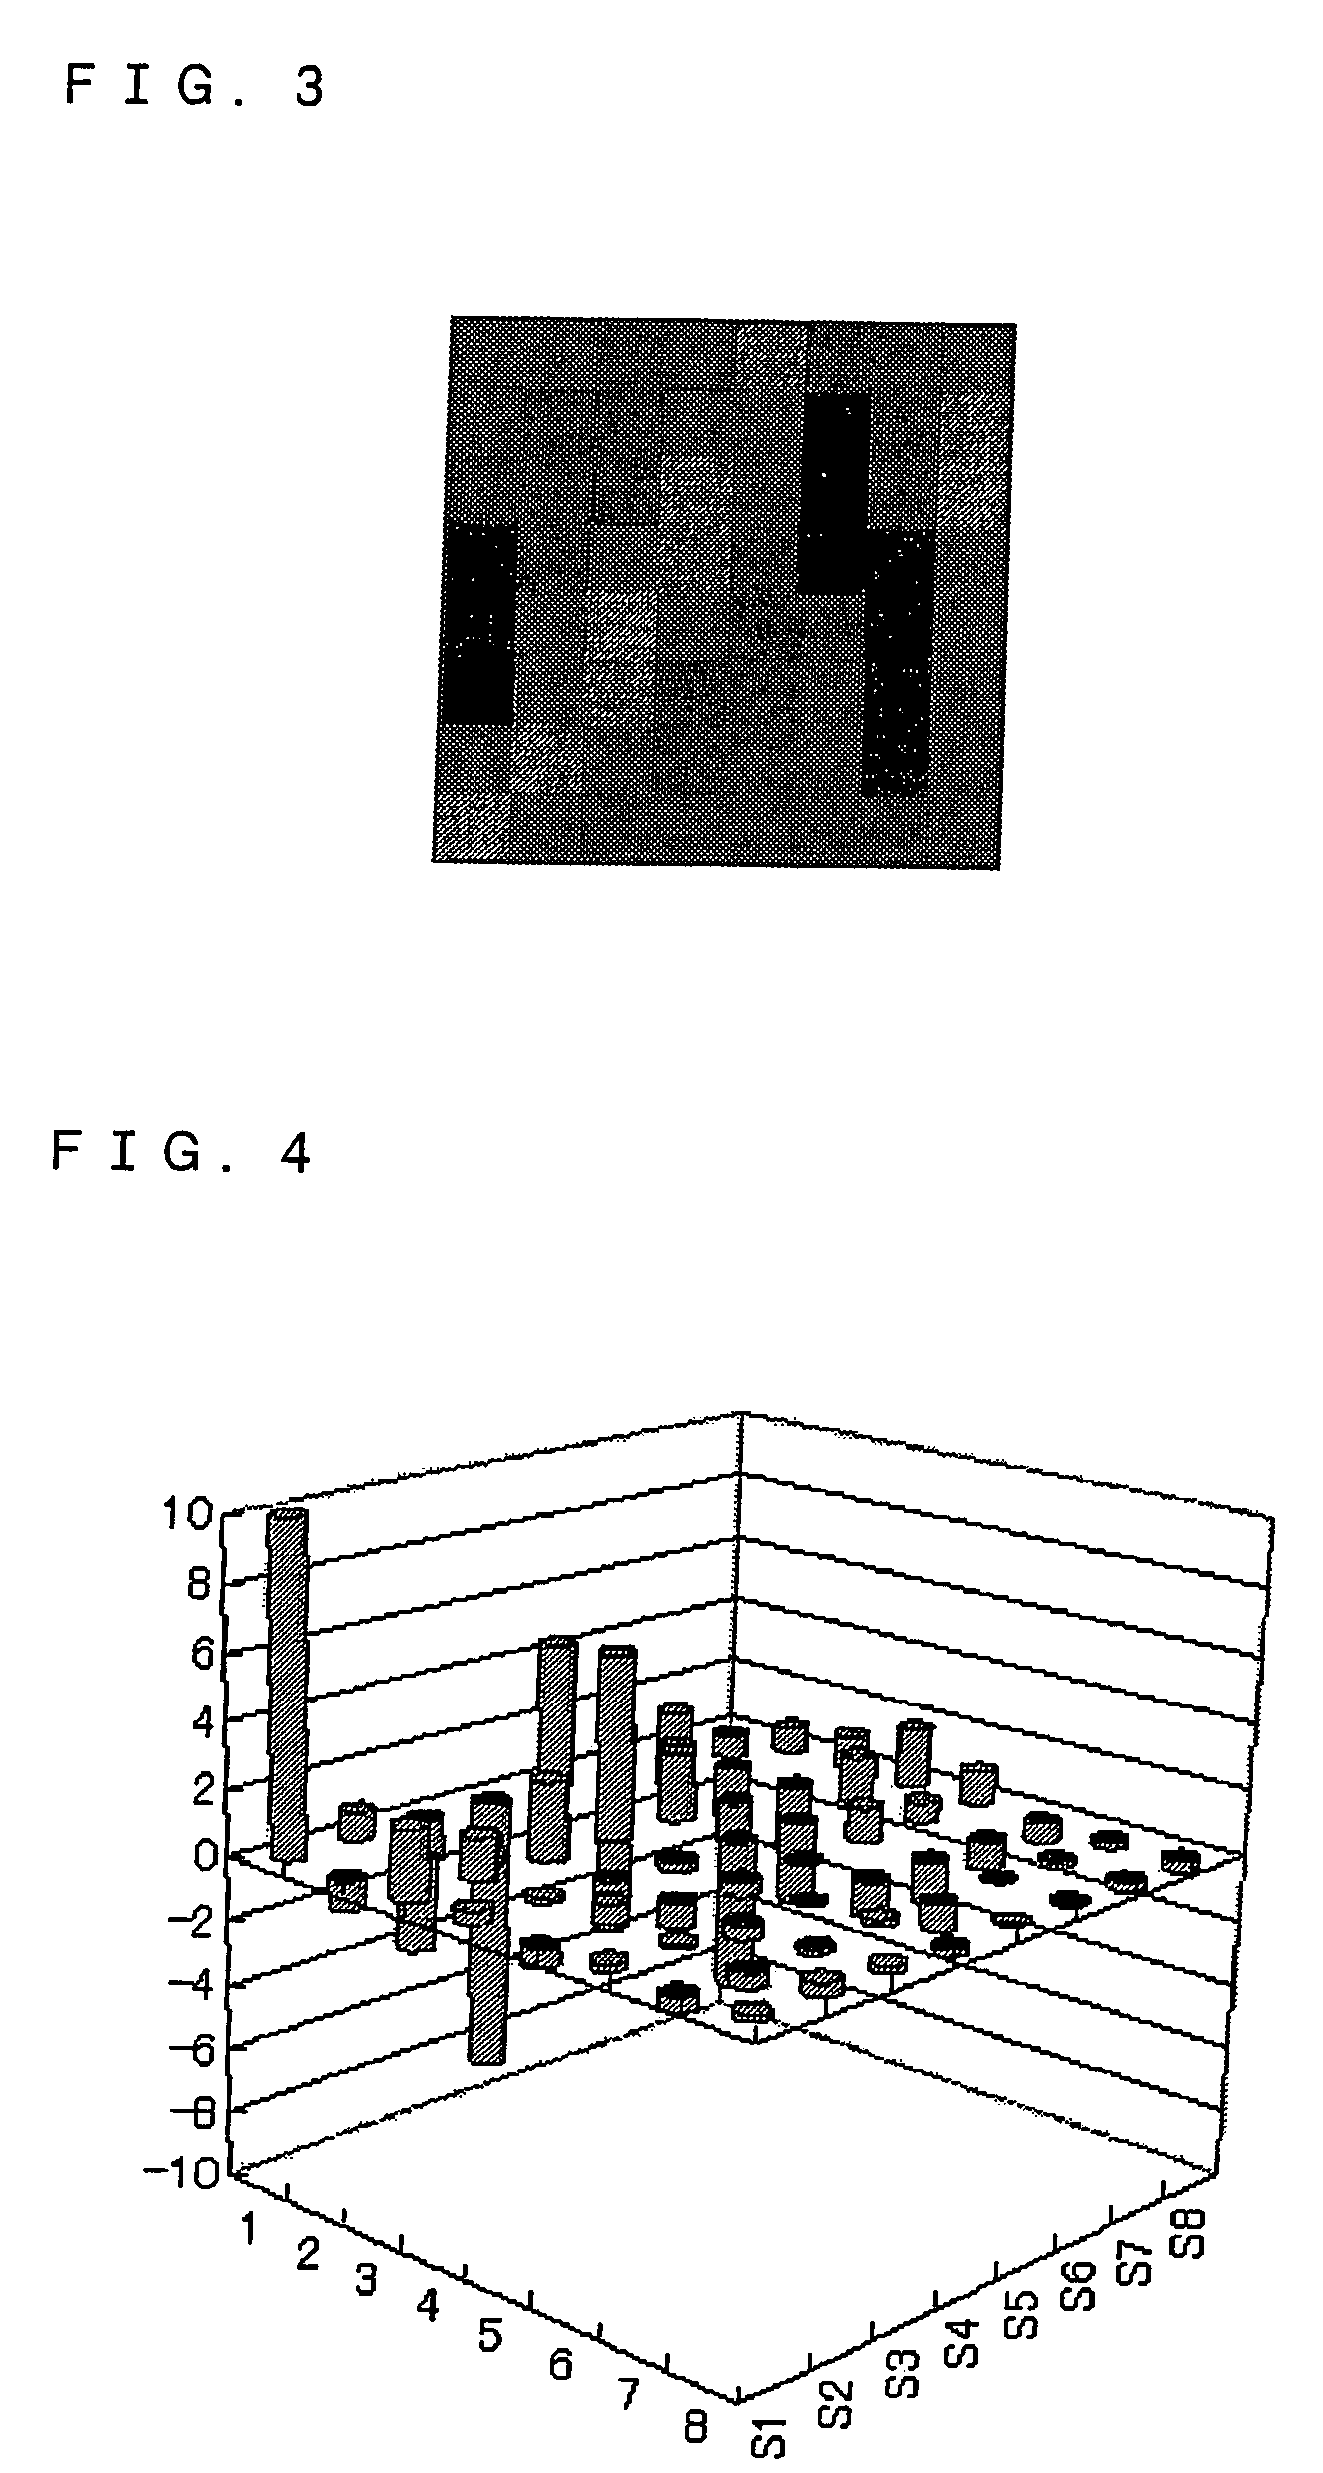 Method and apparatus for generating data representative of features of an image